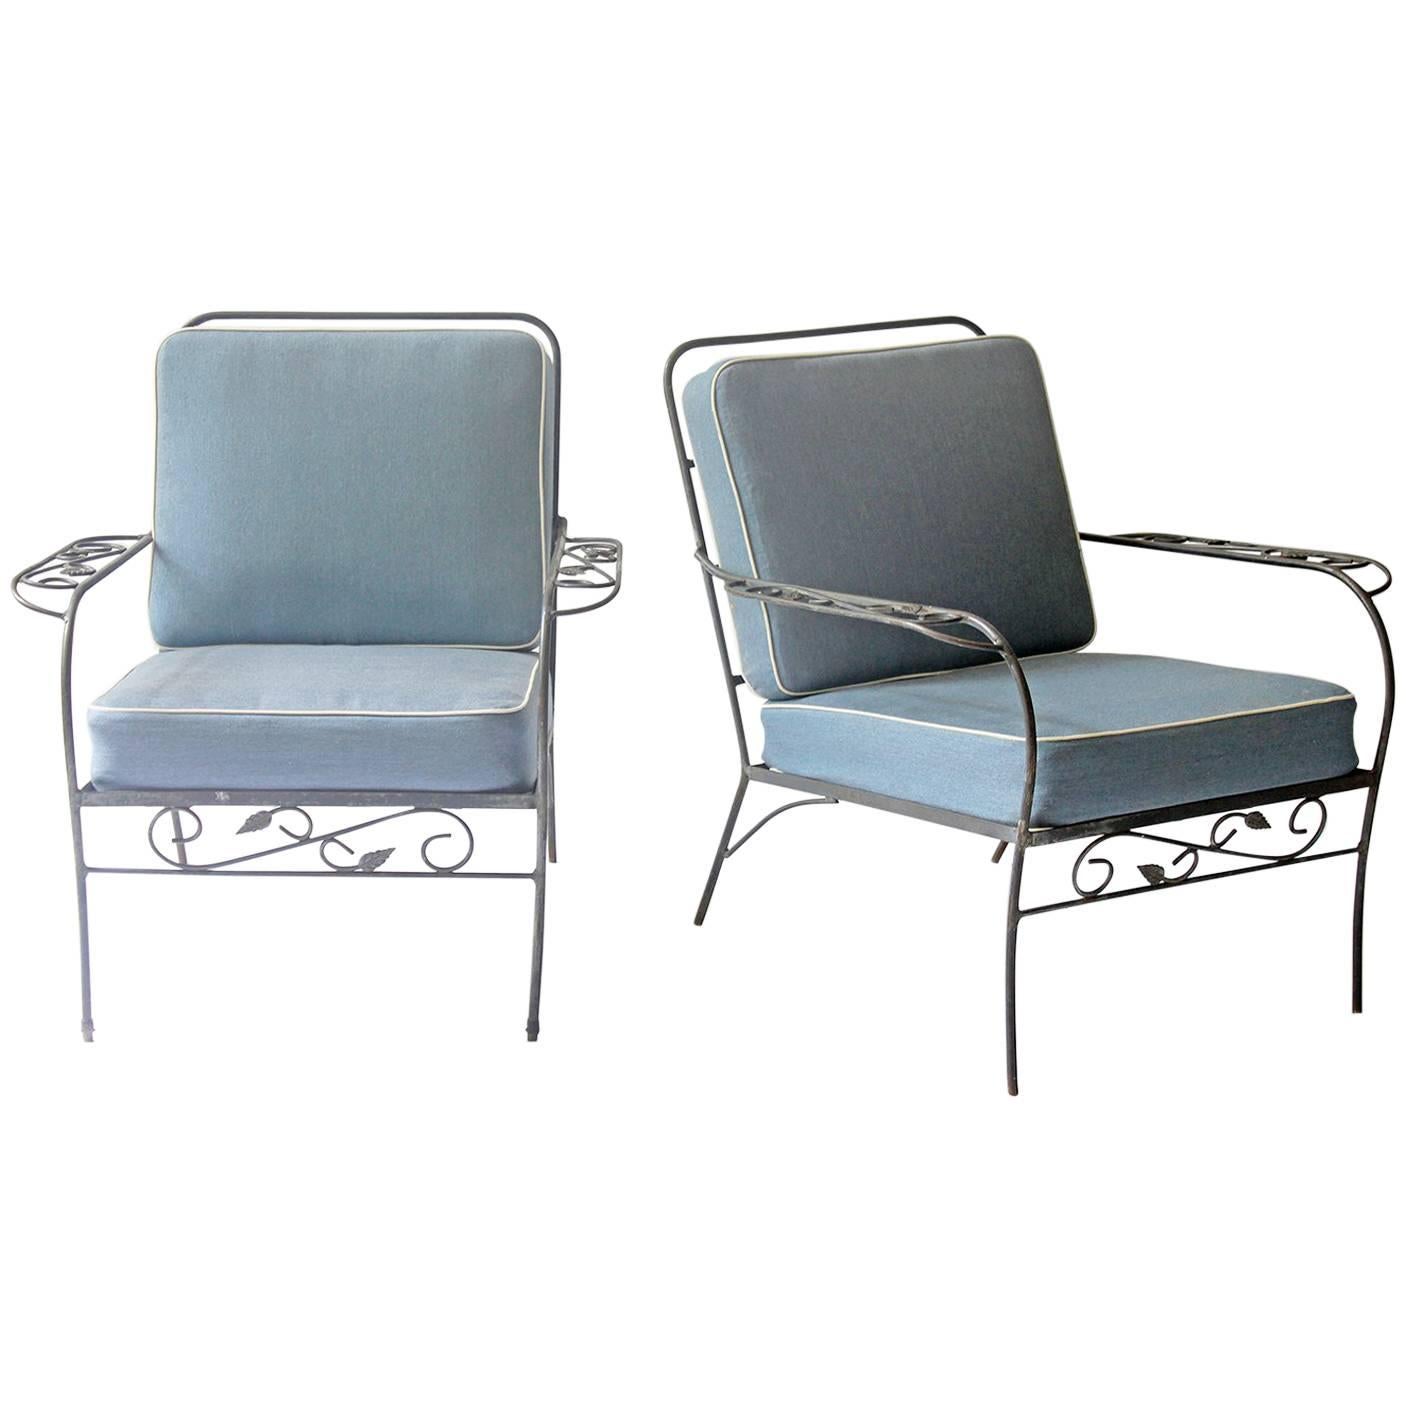 Pair of Swedish Iron-Framed Garden Chairs For Sale